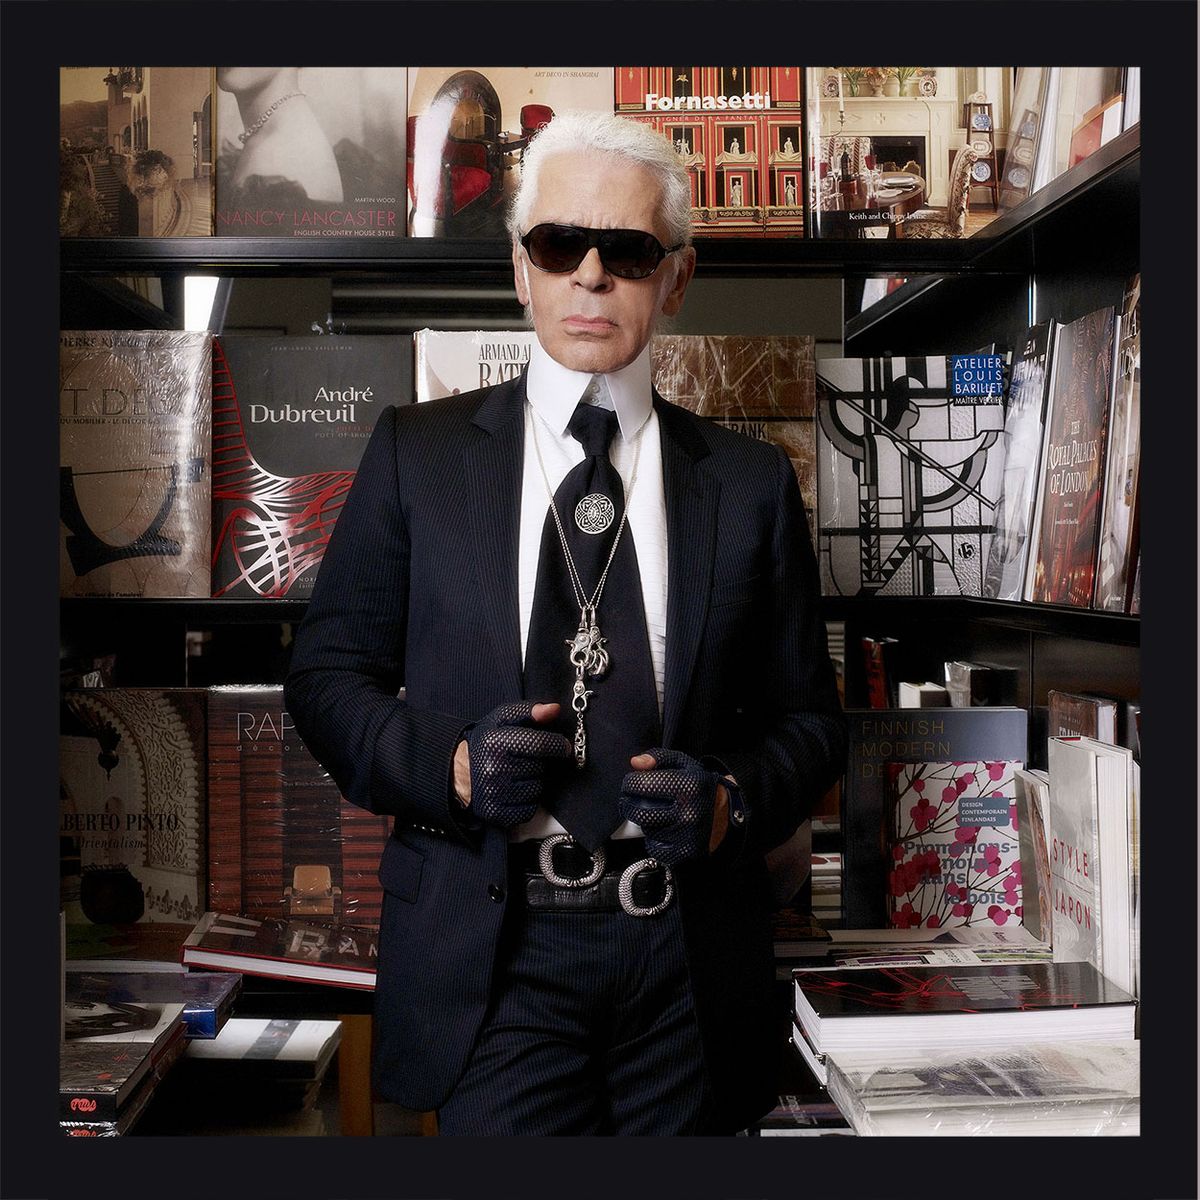 We Asked Karl Lagerfeld to Share His Favorite Things. Here's What